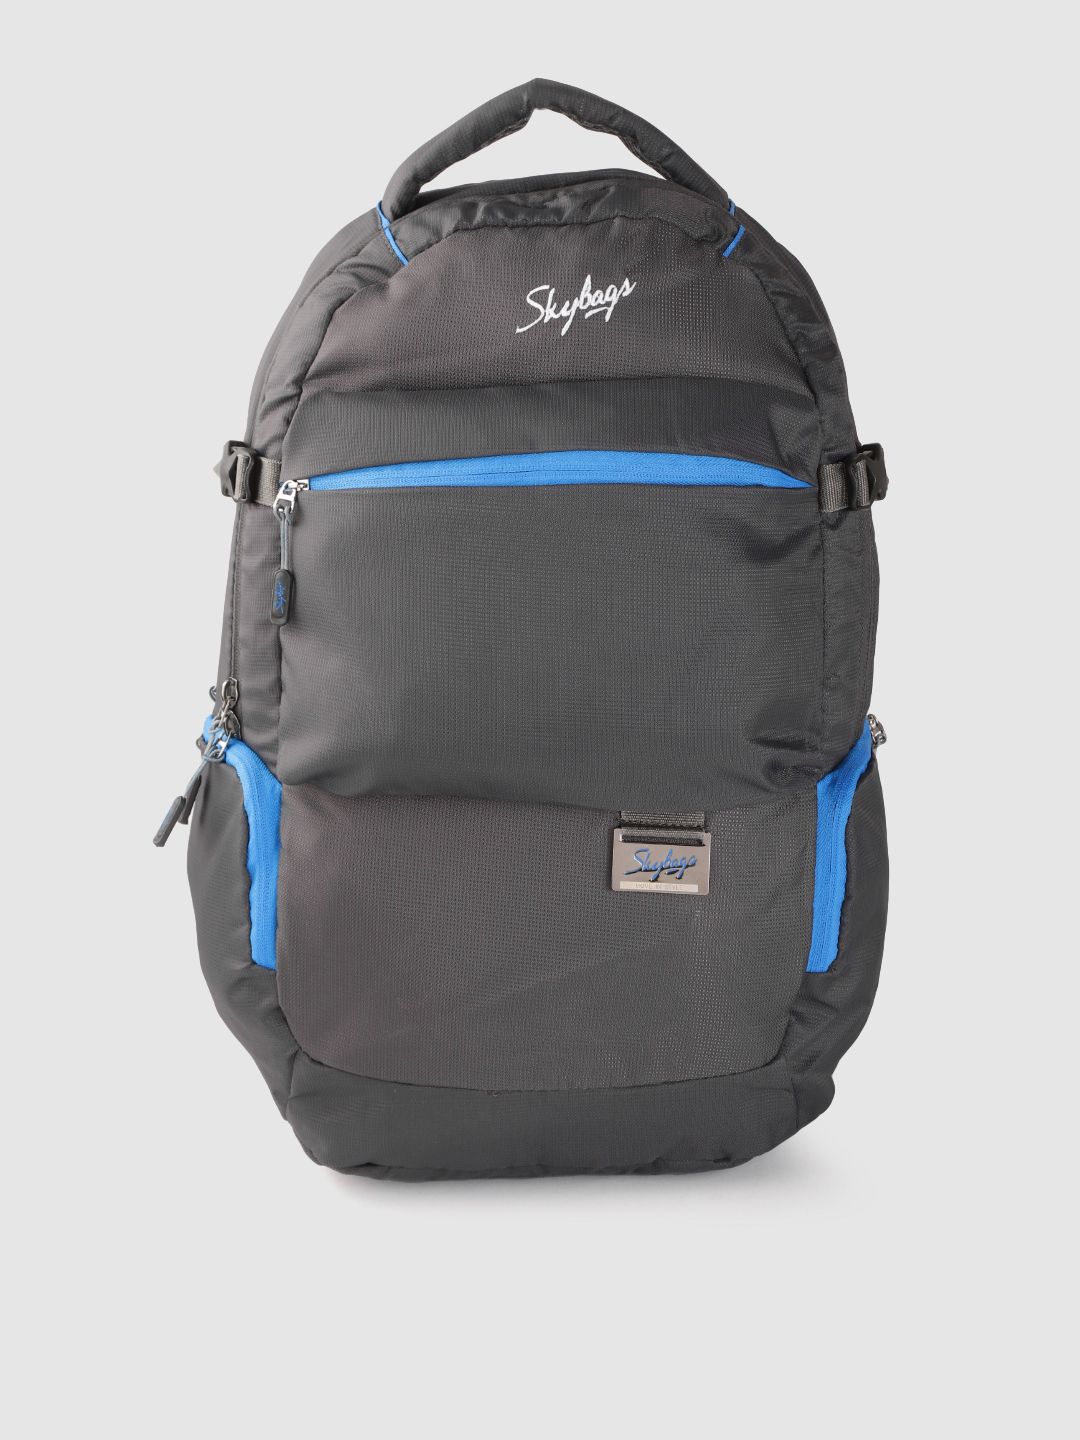 Skybags Unisex Charcoal Grey Solid Backpack Price in India